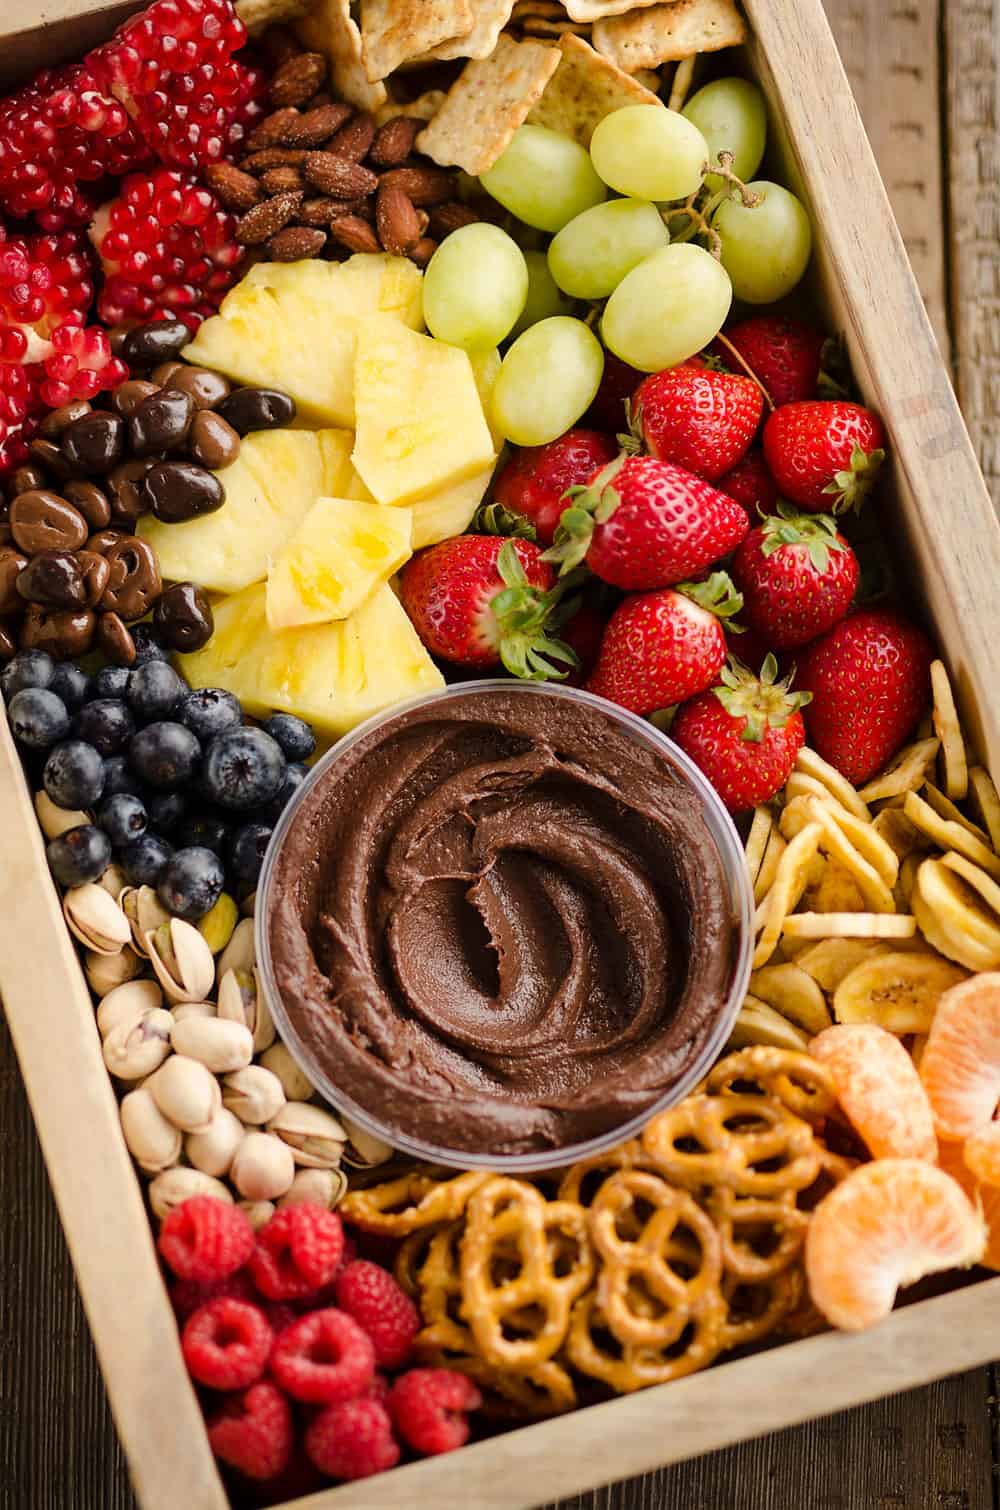 Healthy Fruit & Chocolate Party Tray platter